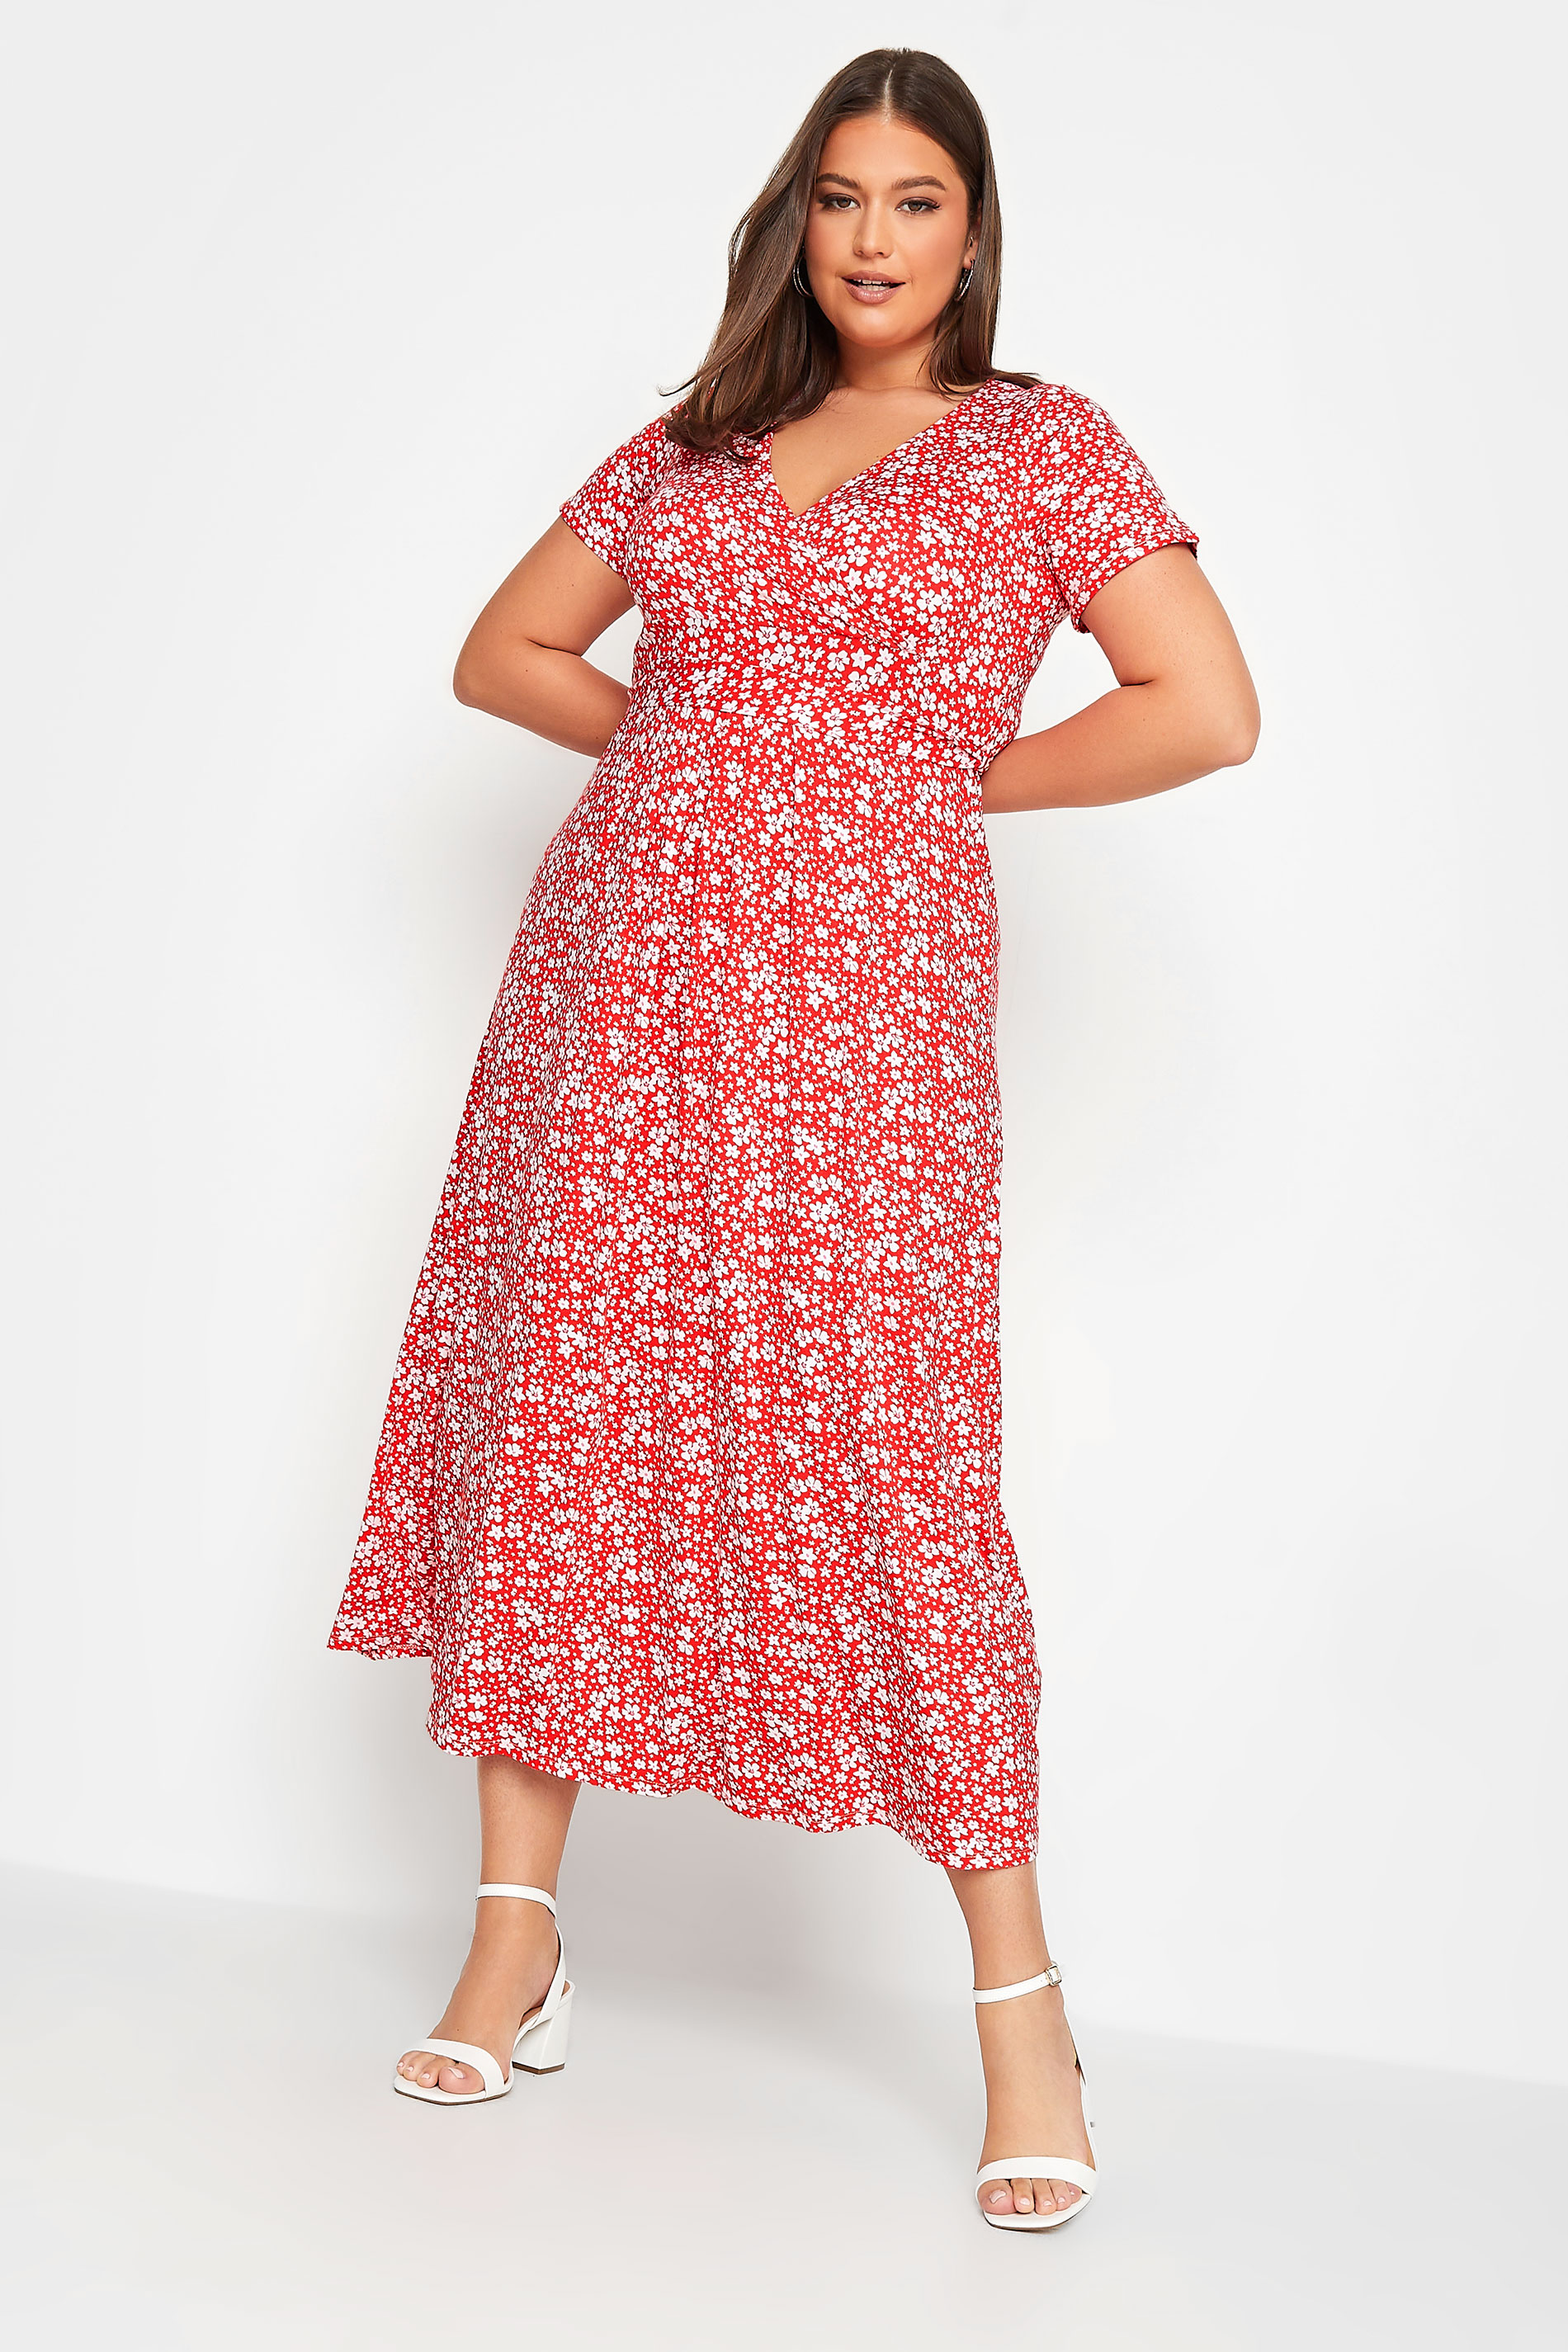 YOURS Curve Plus Size Red Ditsy Print Midaxi Dress | Yours Clothing  2